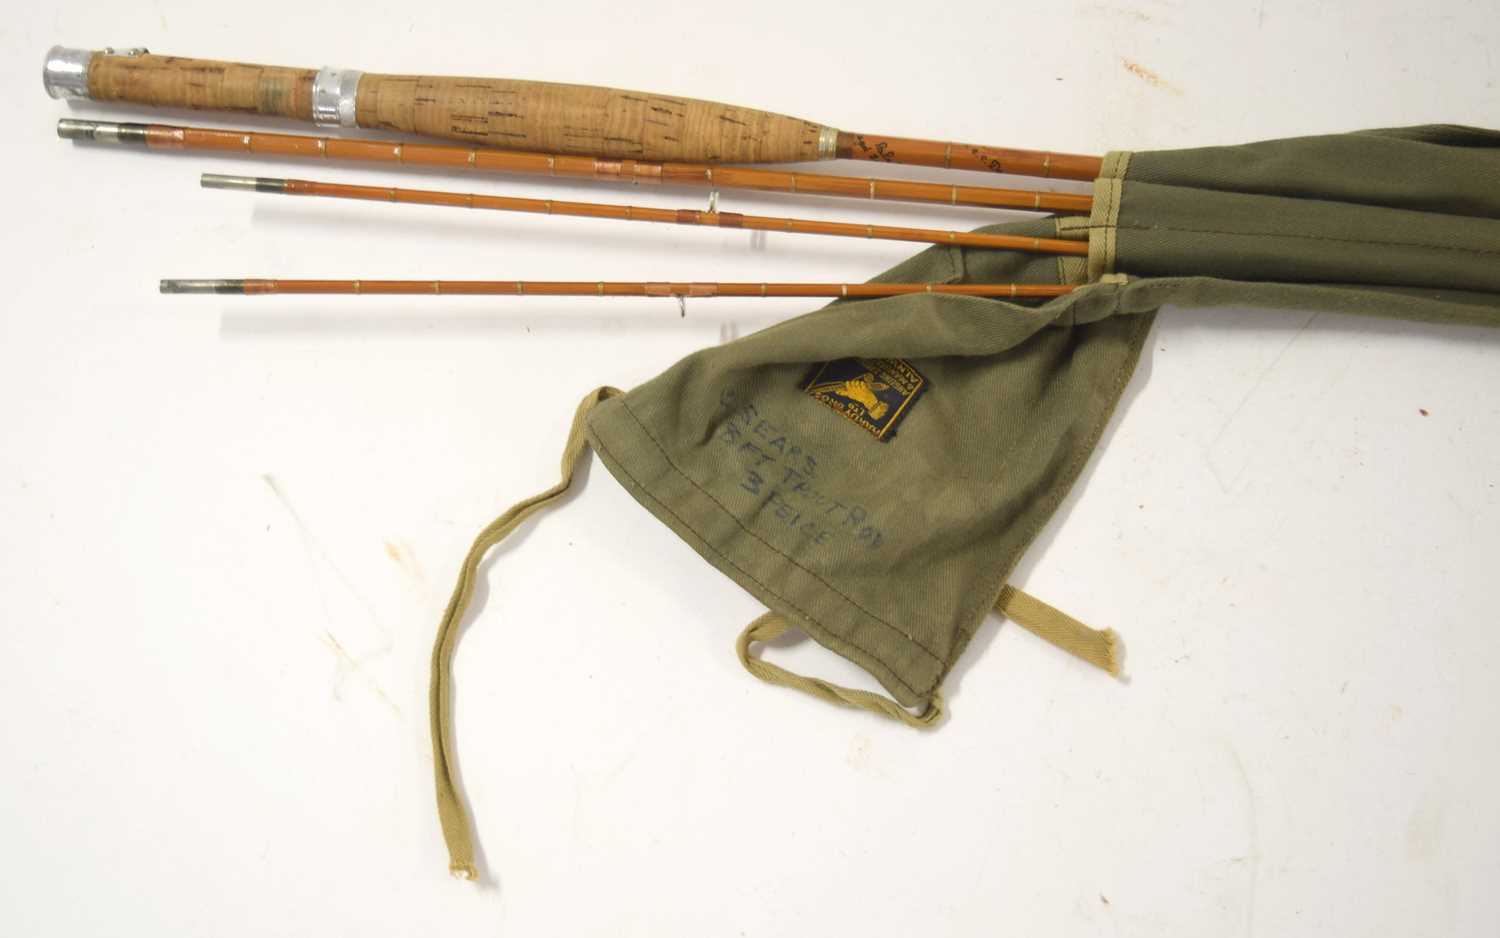 Mid-20th century 3 section split cane rod made by hardy bros ltd stamped “E 66152” with extra top